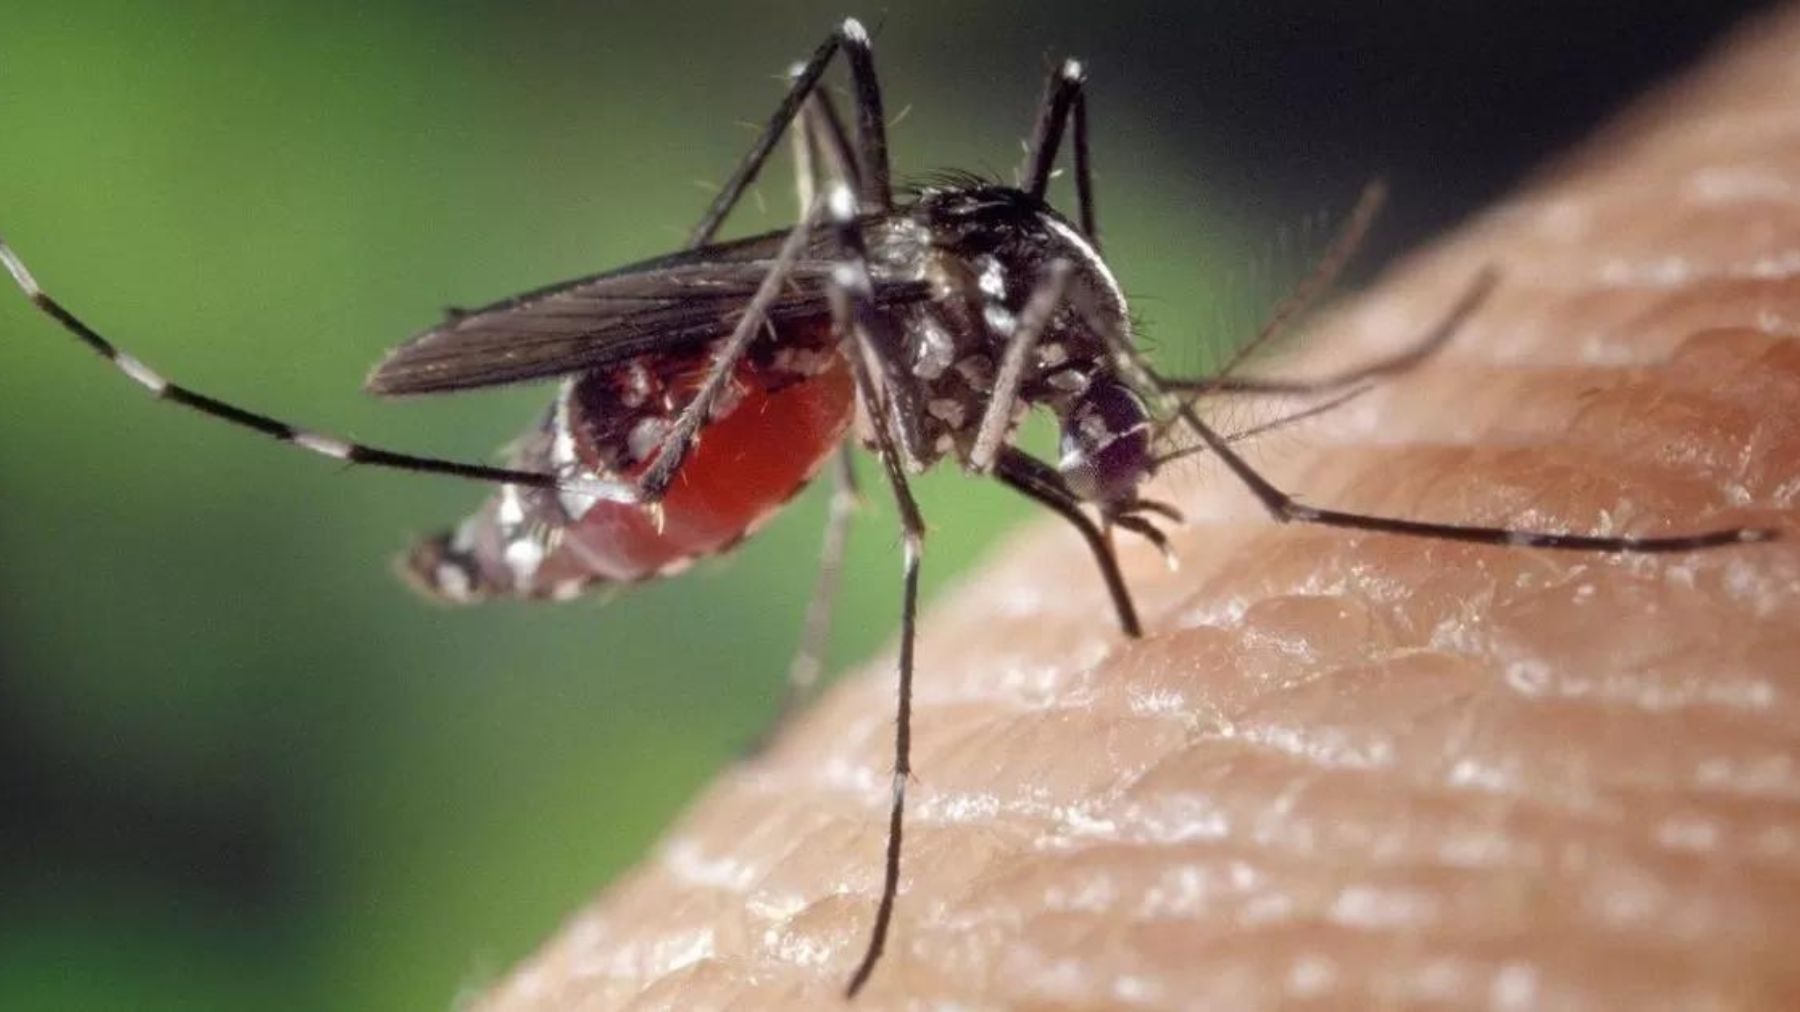 Mosquitoes: how to get rid of them through simple and natural remedies